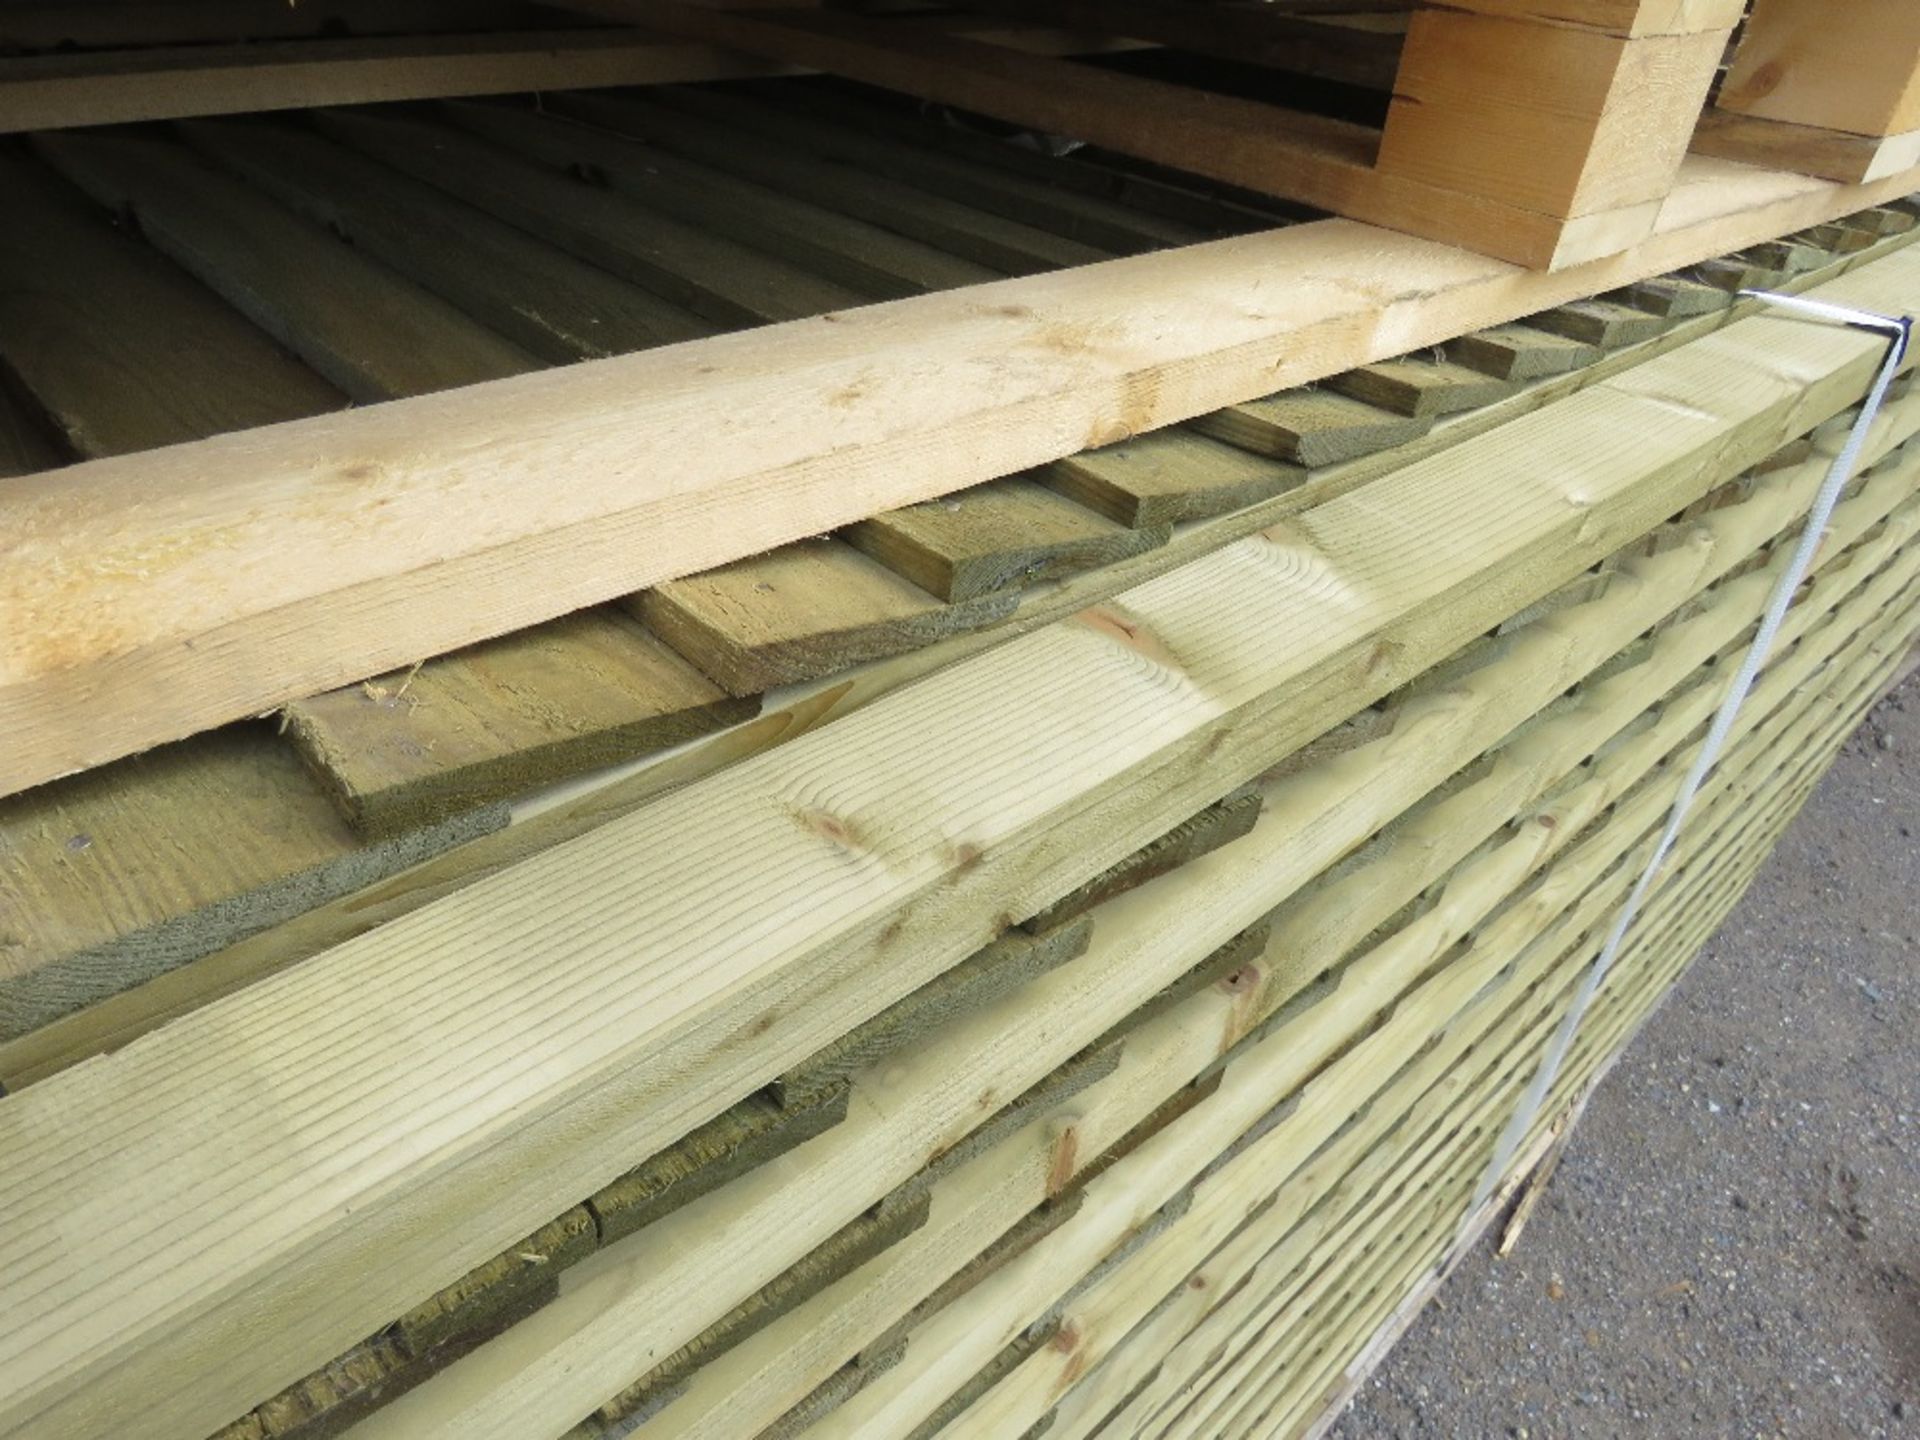 24NO FEATHER EDGE CLAD FENCING PANELS, PRESSURE TREATED, 1.8M X 1.83M APPROX. - Image 4 of 4